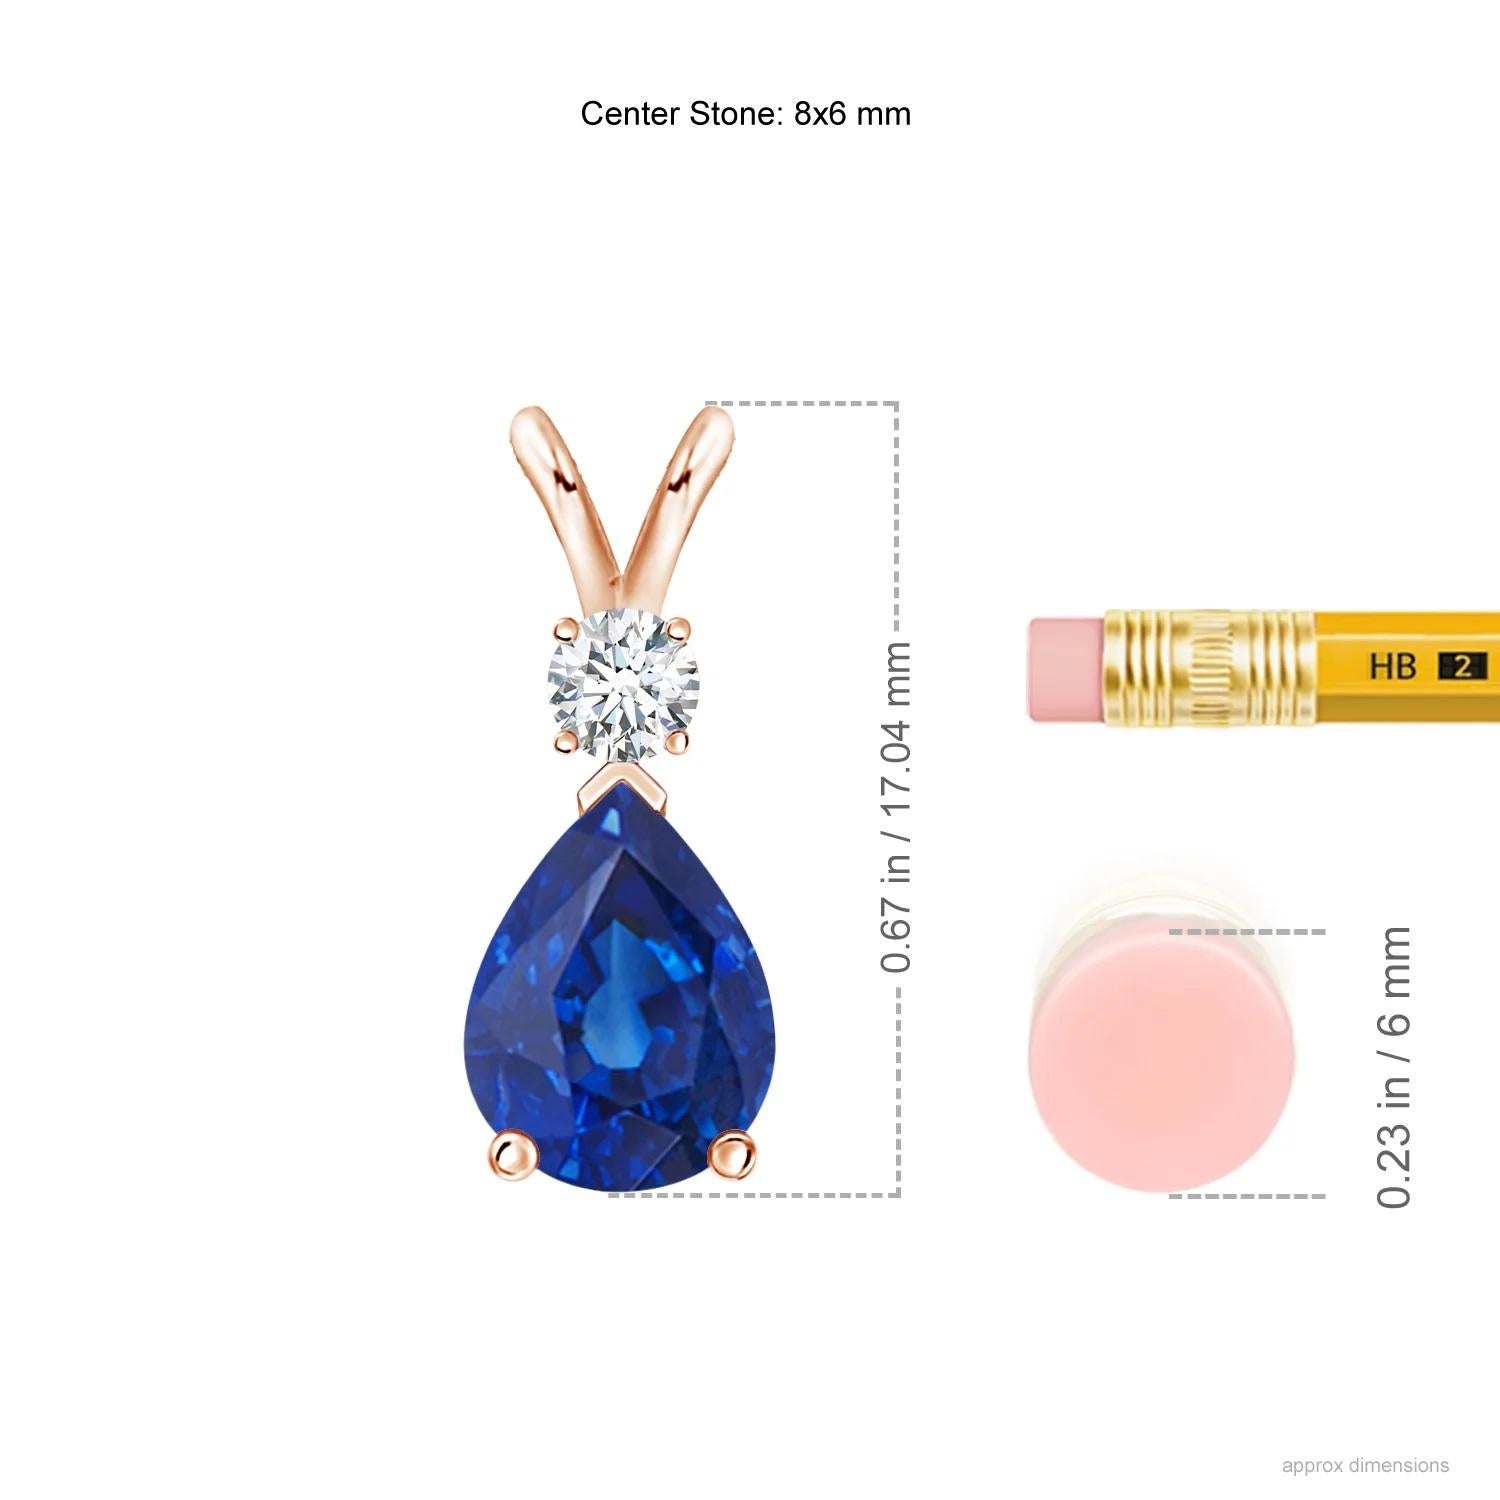 This classic solitaire pendant features a pear-shaped sapphire secured in a prong setting. A brilliant round diamond sits atop the blue gemstone adding to the design's charm. Simple yet appealing, this sapphire pendant in 14k rose gold is crafted